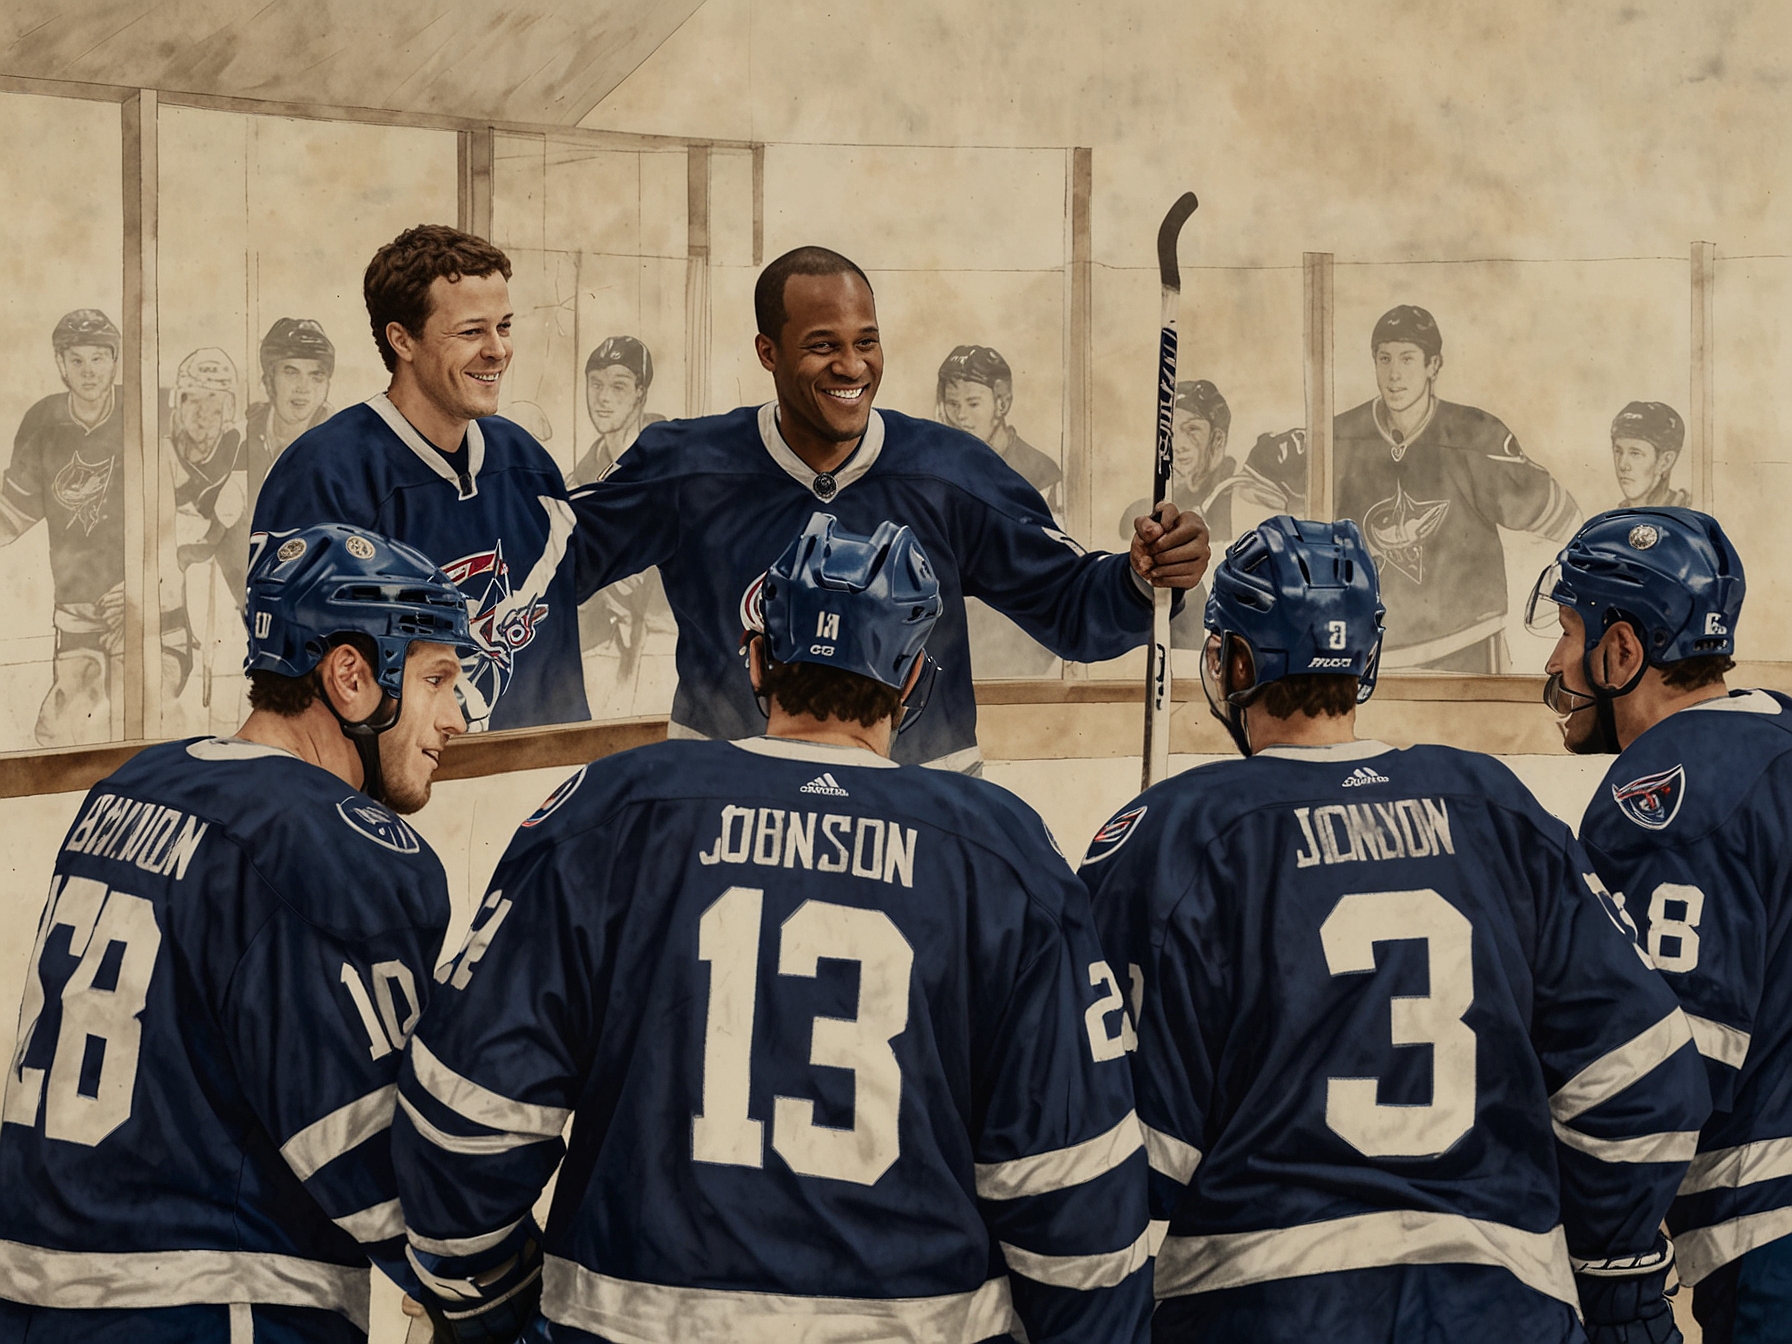 Jack Johnson shown mentoring young Blue Jackets players during a practice session, emphasizing his role as a leader and experienced guide for the team's rebuild efforts.